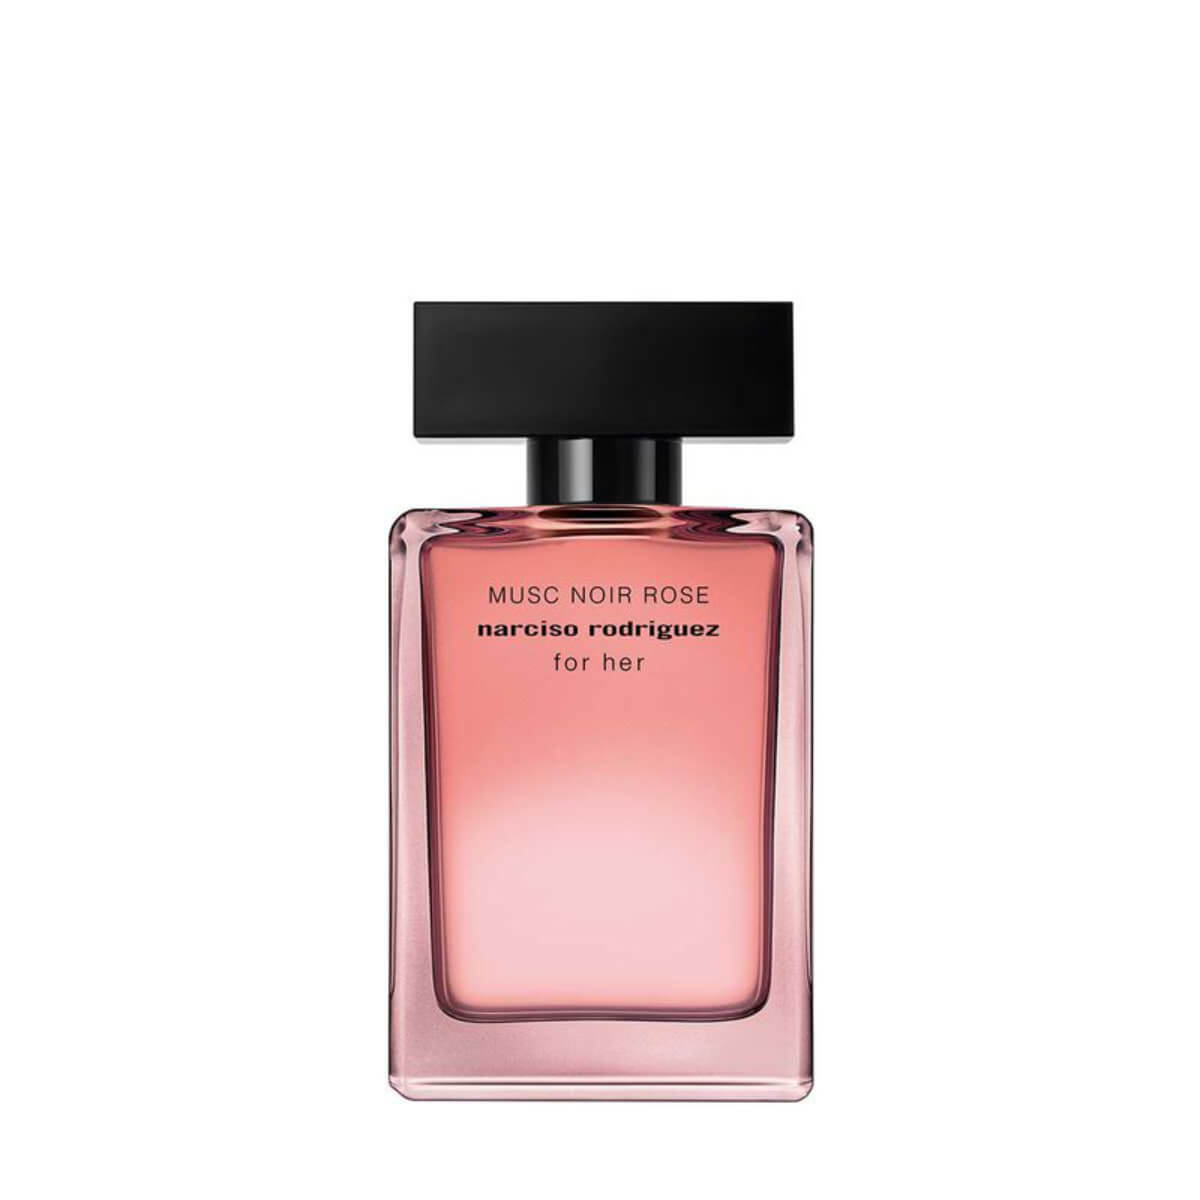 Narciso Rodriguez Musc Noir Rose For Her EDP - 50 ML